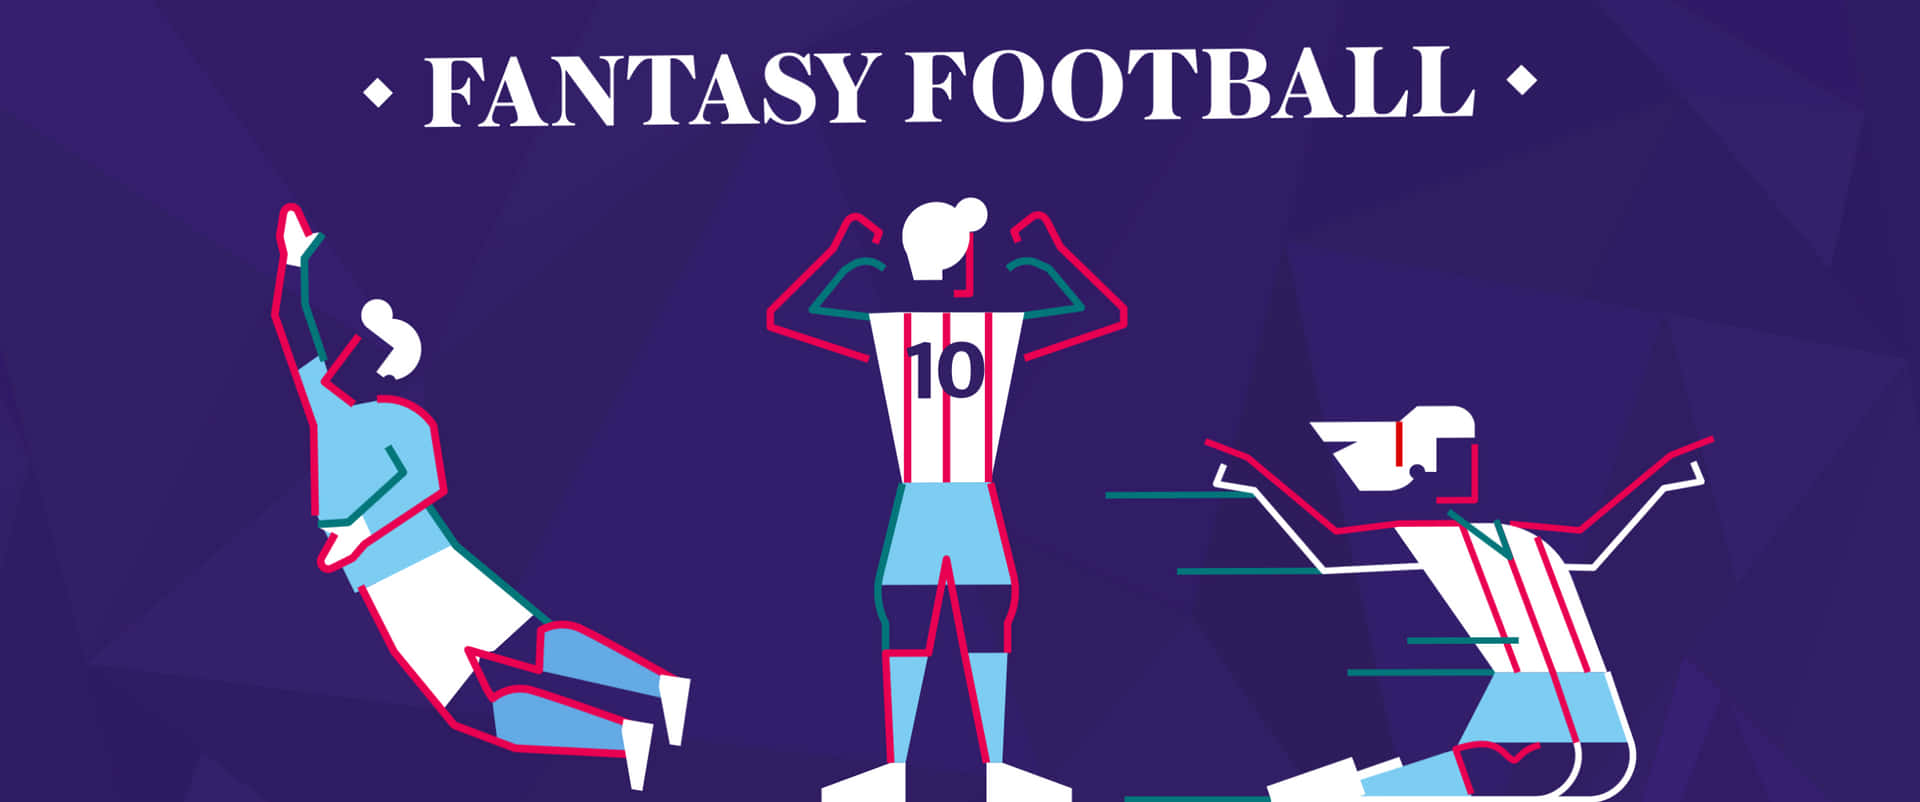 Take Your Fantasy Football Strategy to the Next Level Wallpaper